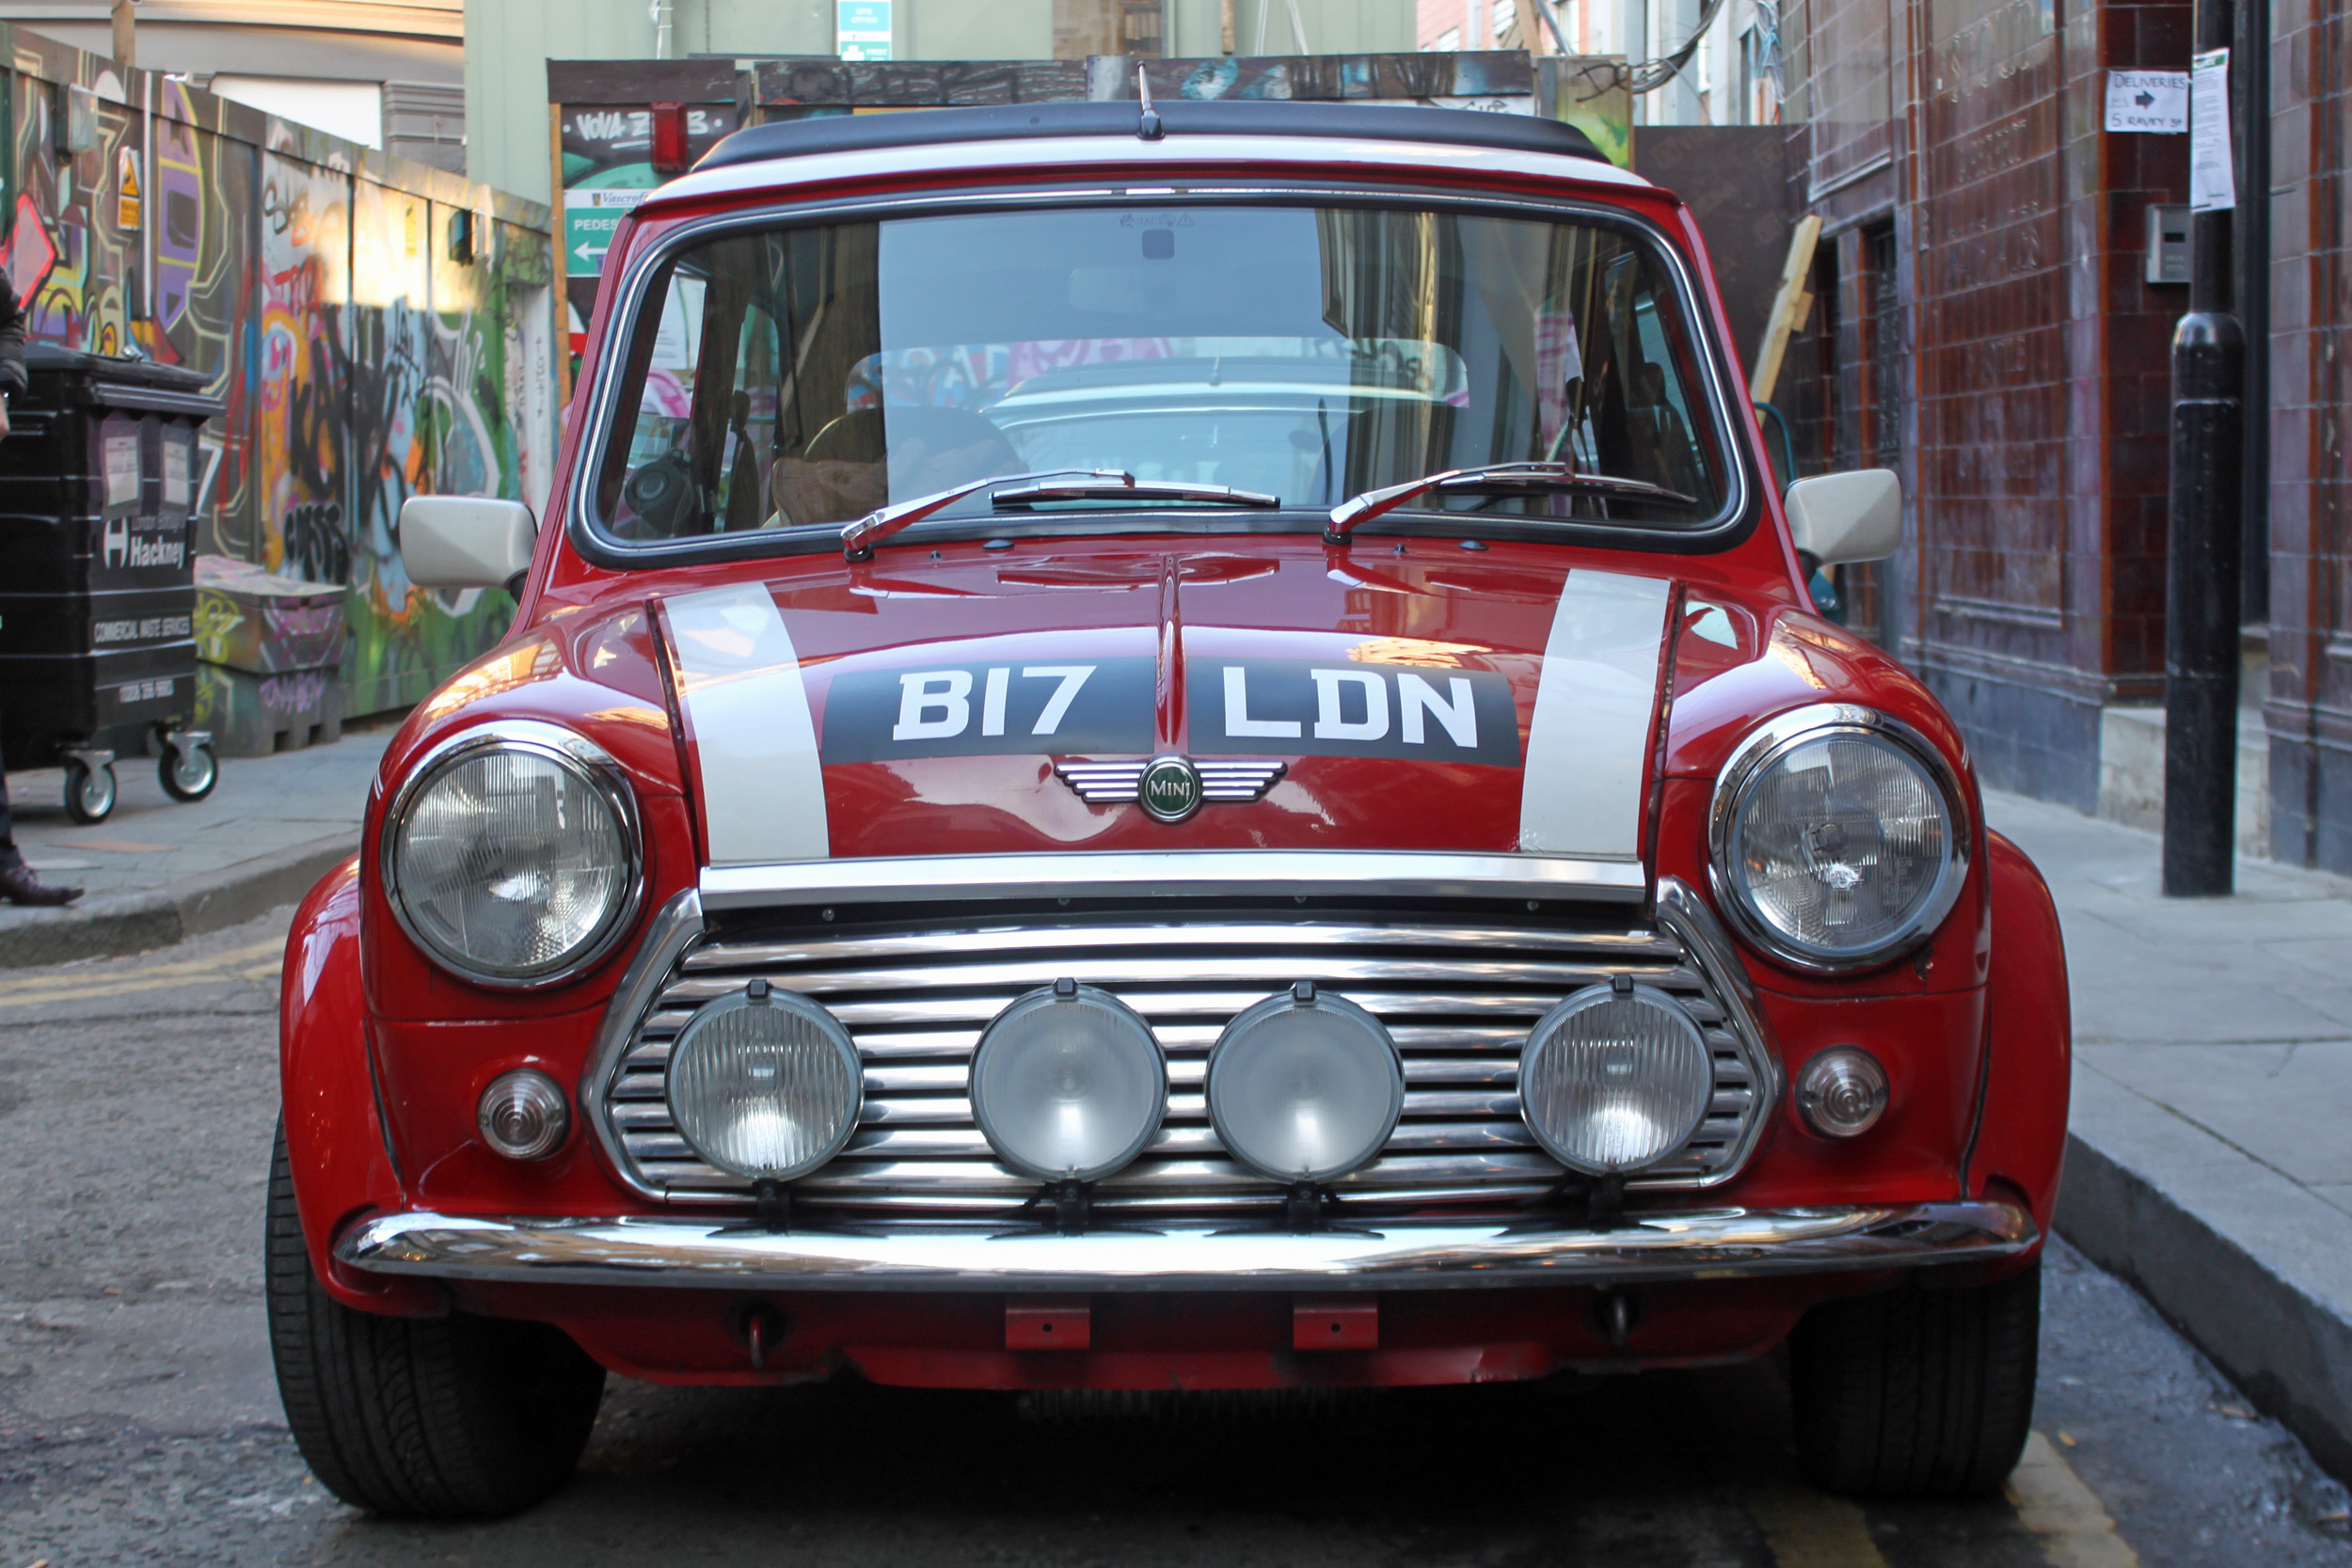 Small Car, Big City: Driving a Vintage Mini Through the Streets of ...